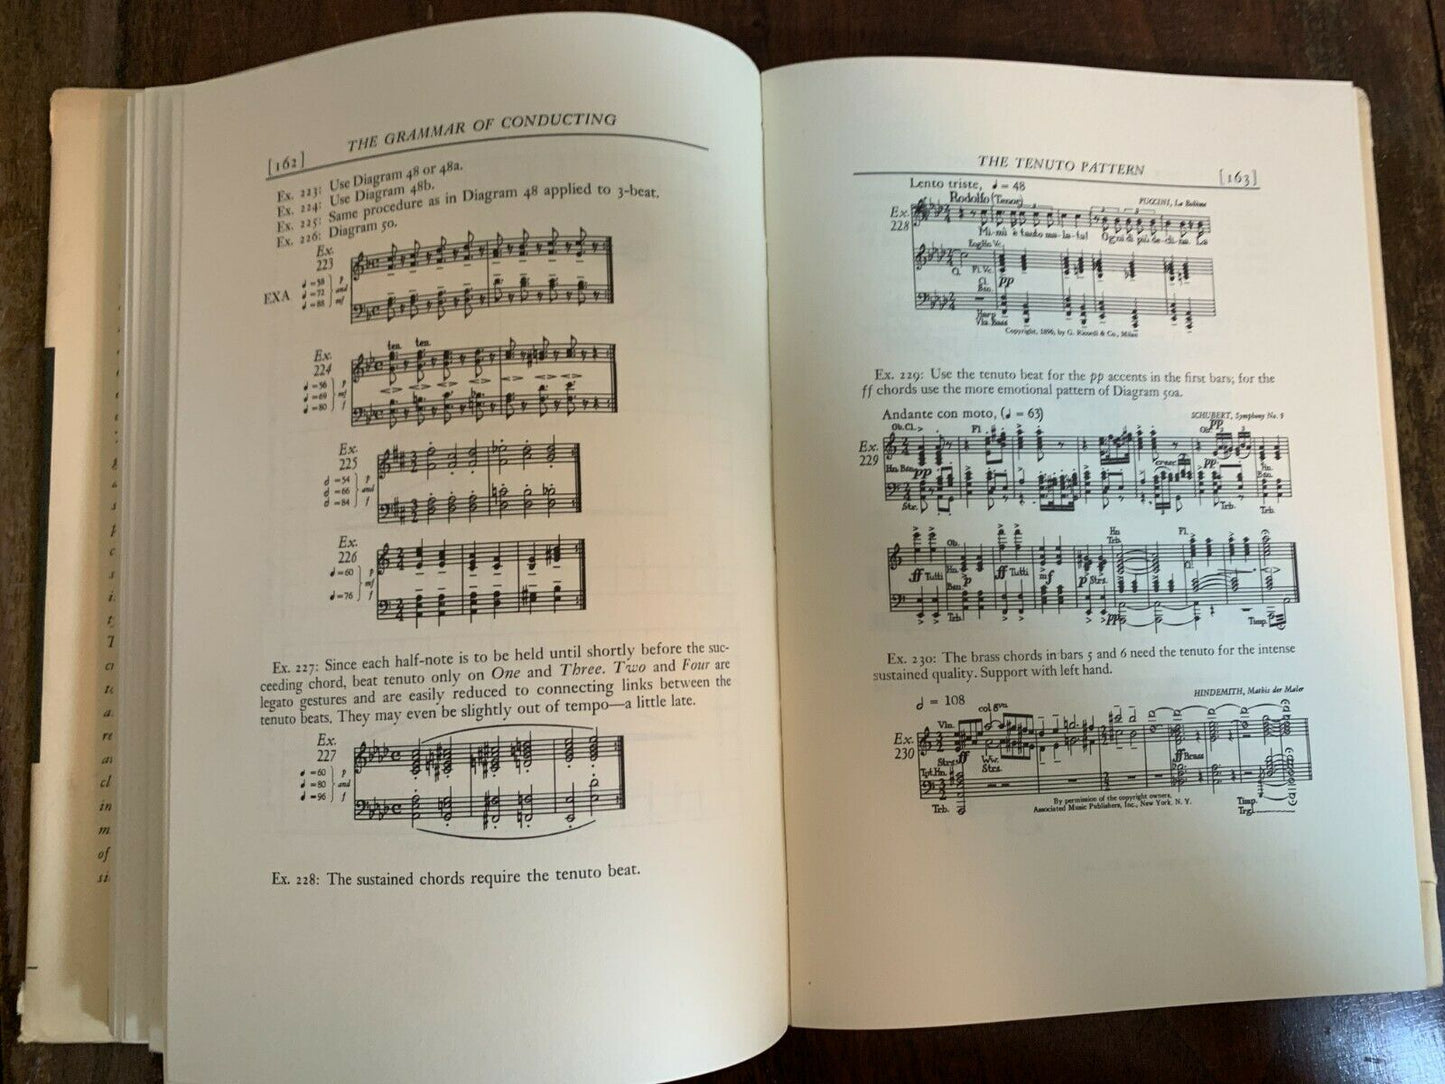 The Grammar of Conducting by Max Rudolf [1950]